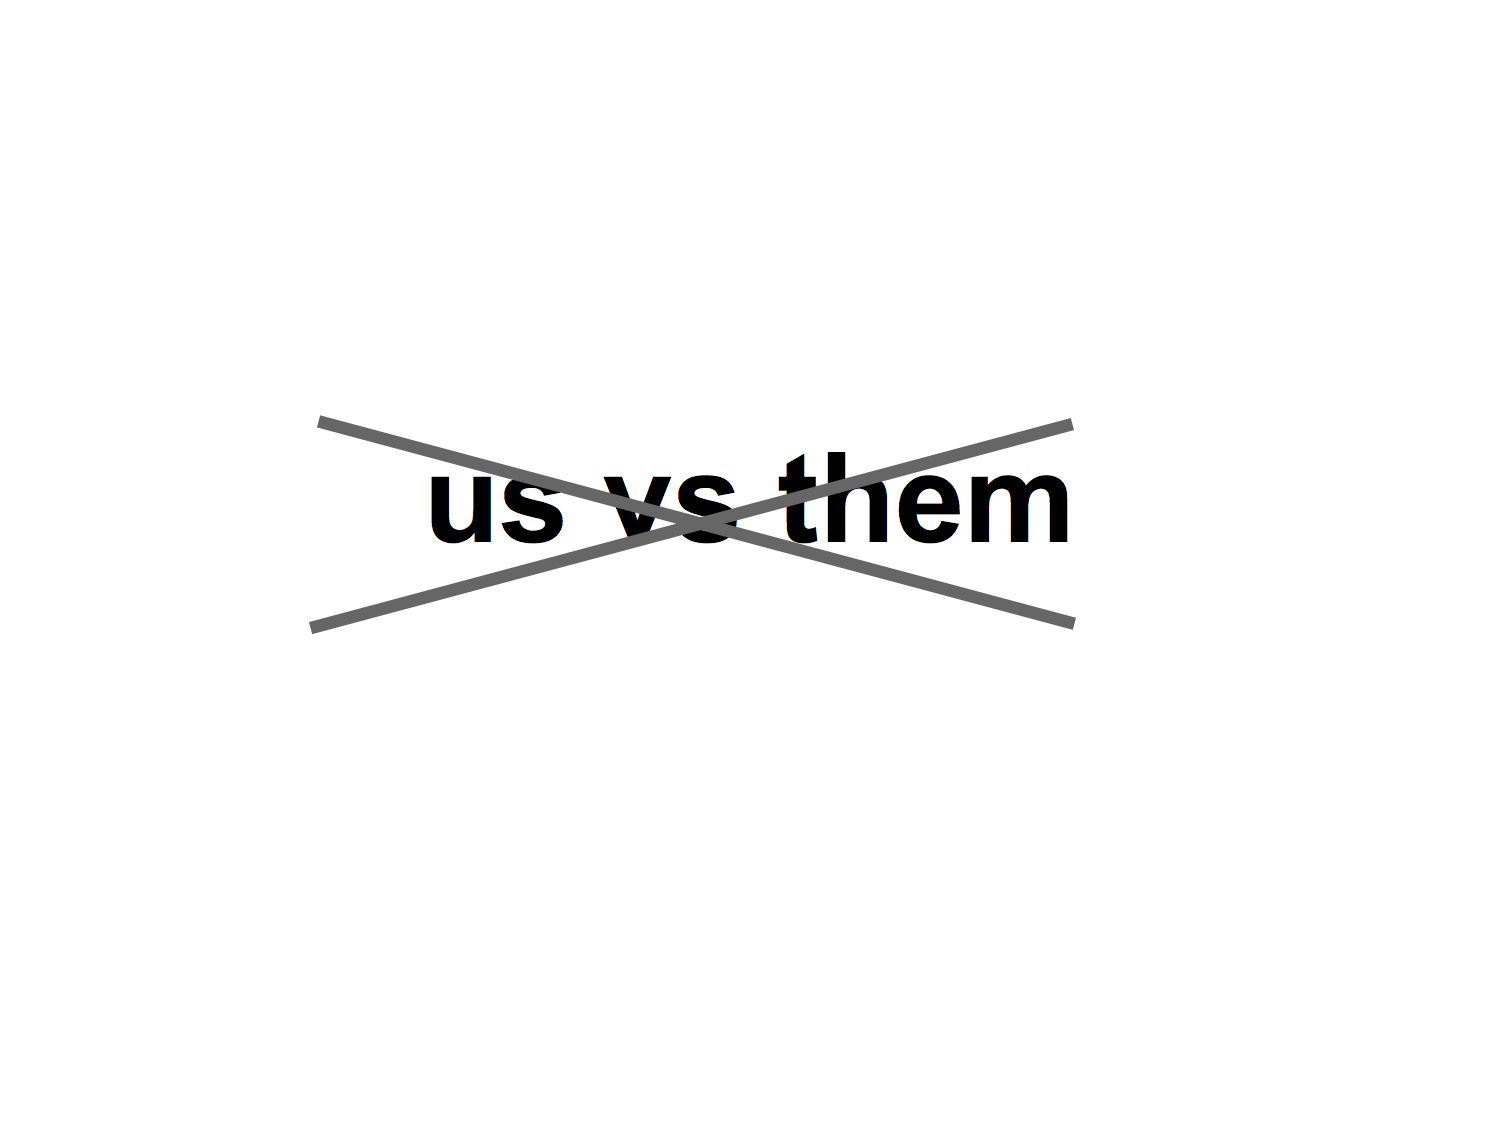 Us vs Them (crossed out)